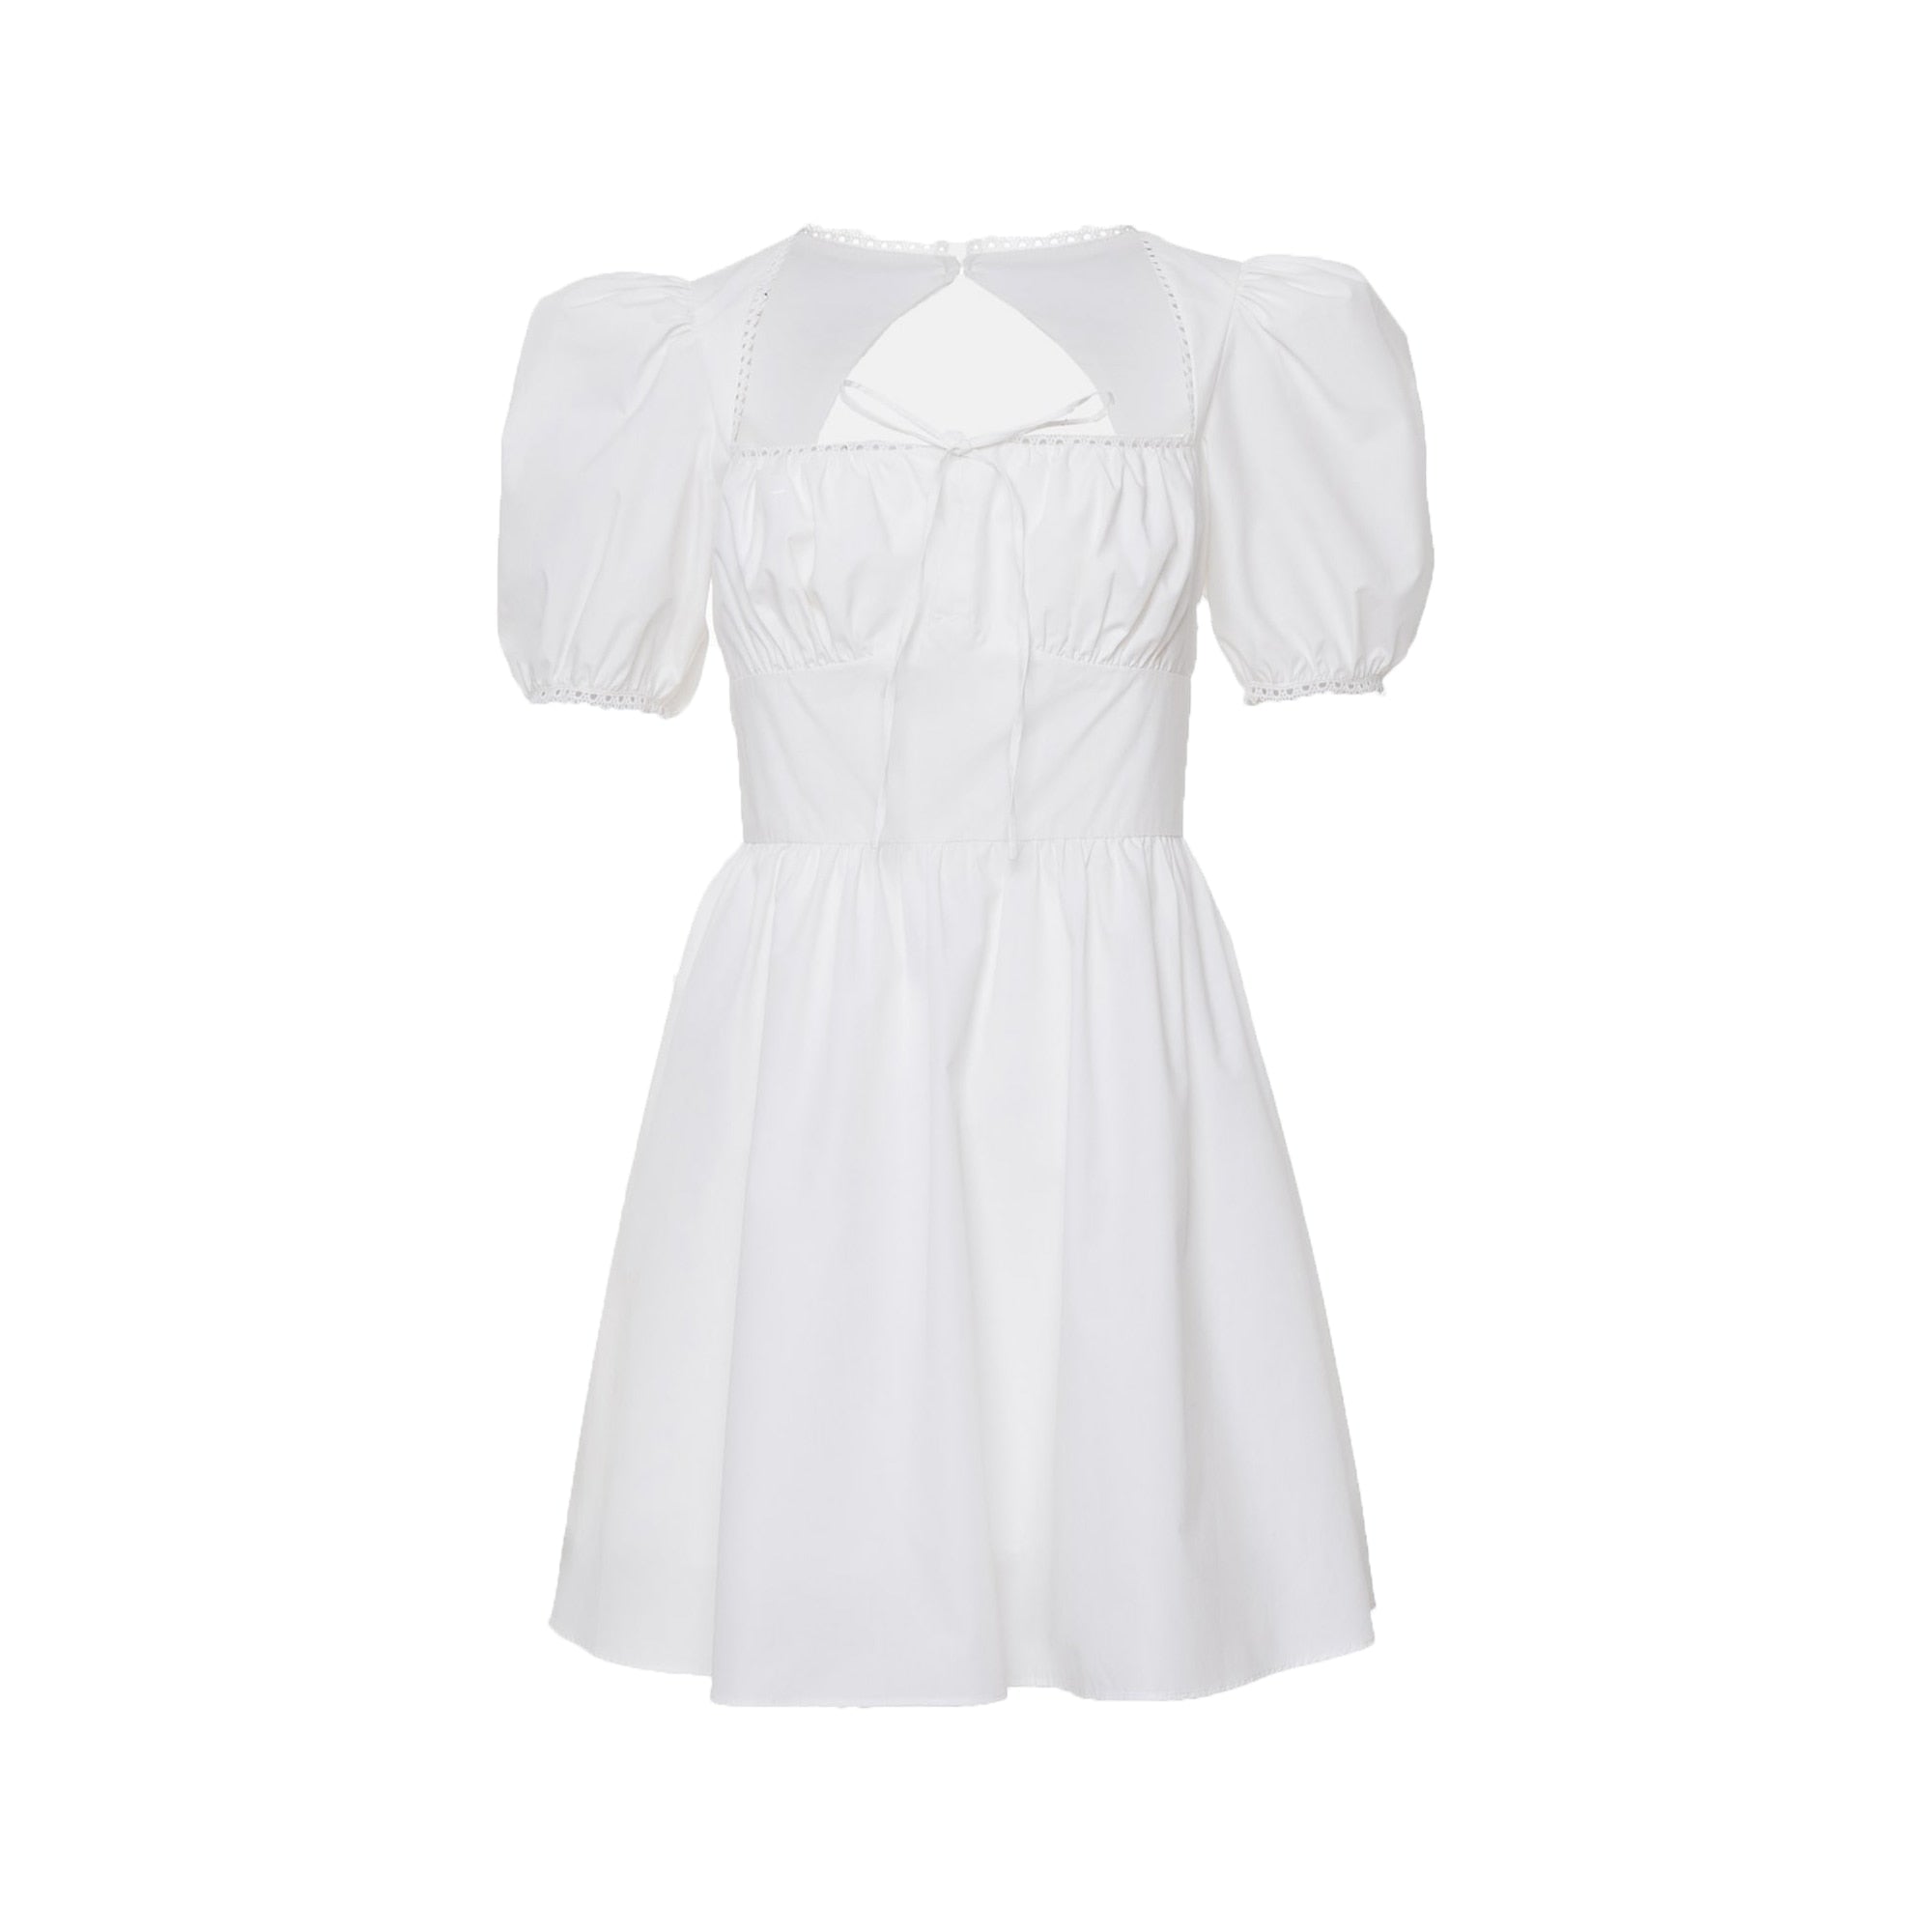 Gathered Cutout Mini Dress Summer Solid White Dress Square Neck Cinched Waist Airy Lantern Sleeve Flared Hem Lady Party Dress